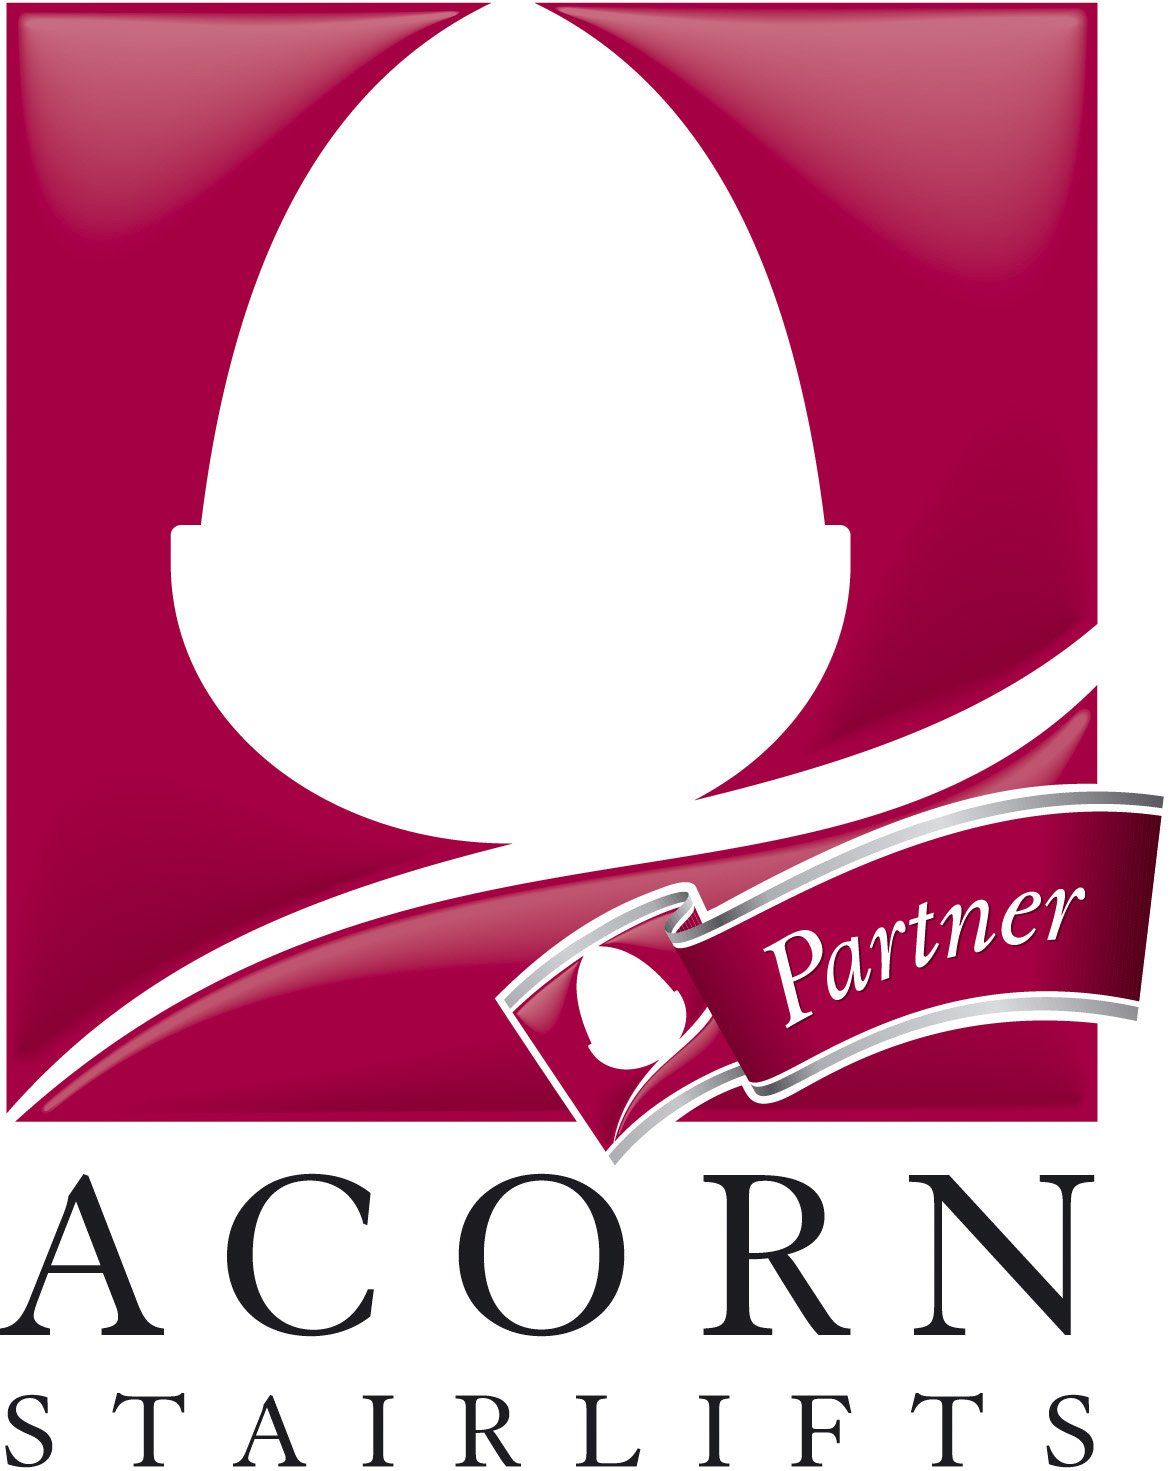 Acorn Stairlifts North Wales - Helping Hand Stairlifts